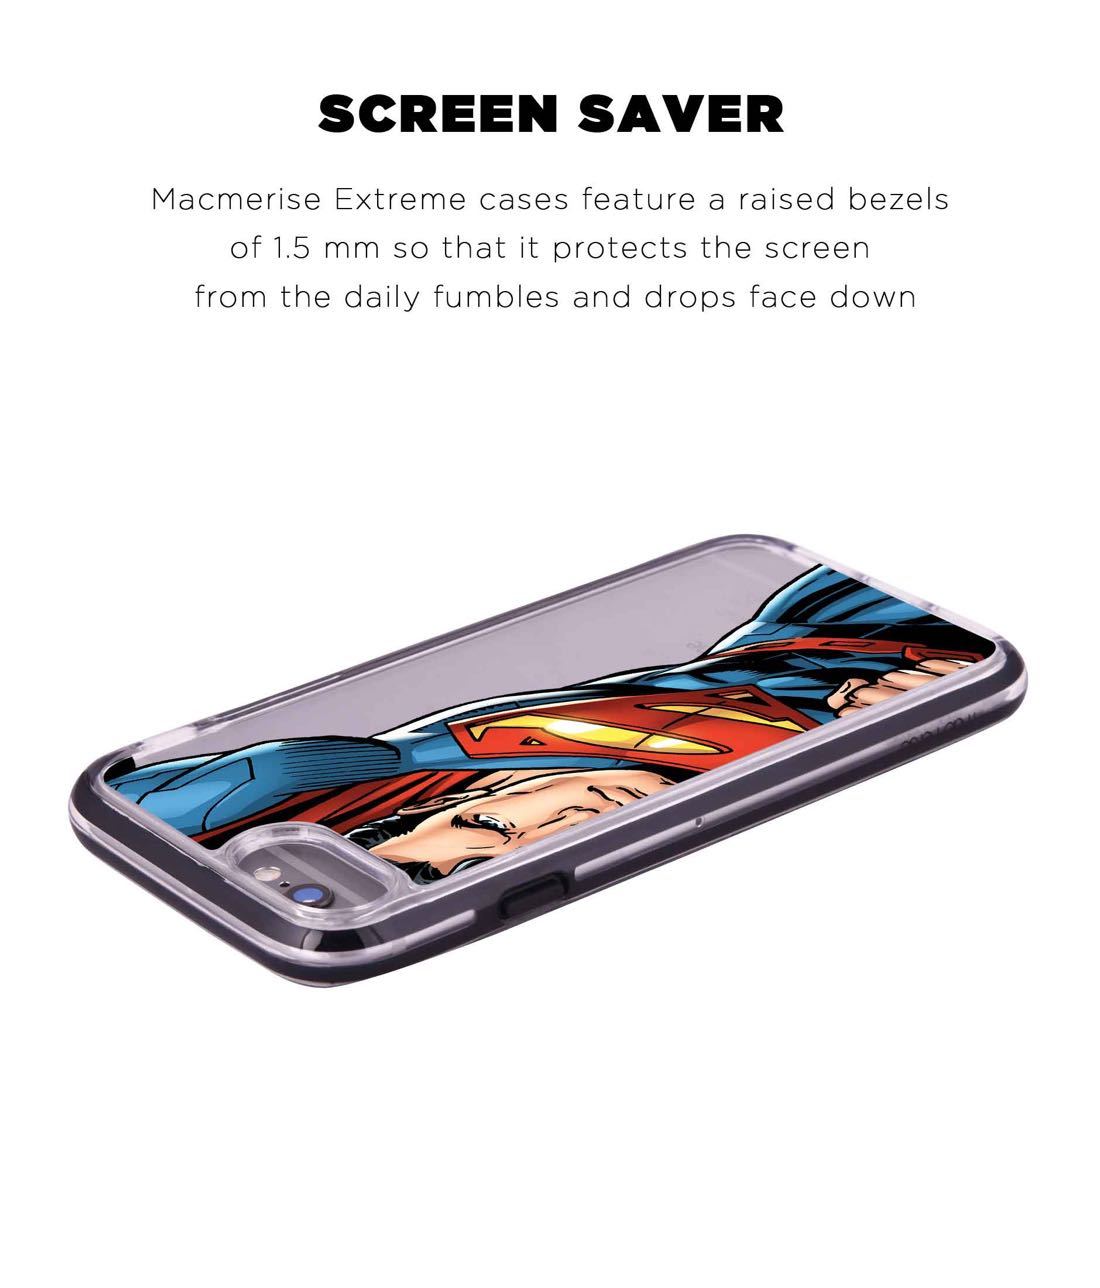 Speed it like Superman - Extreme Phone Case for iPhone 6S